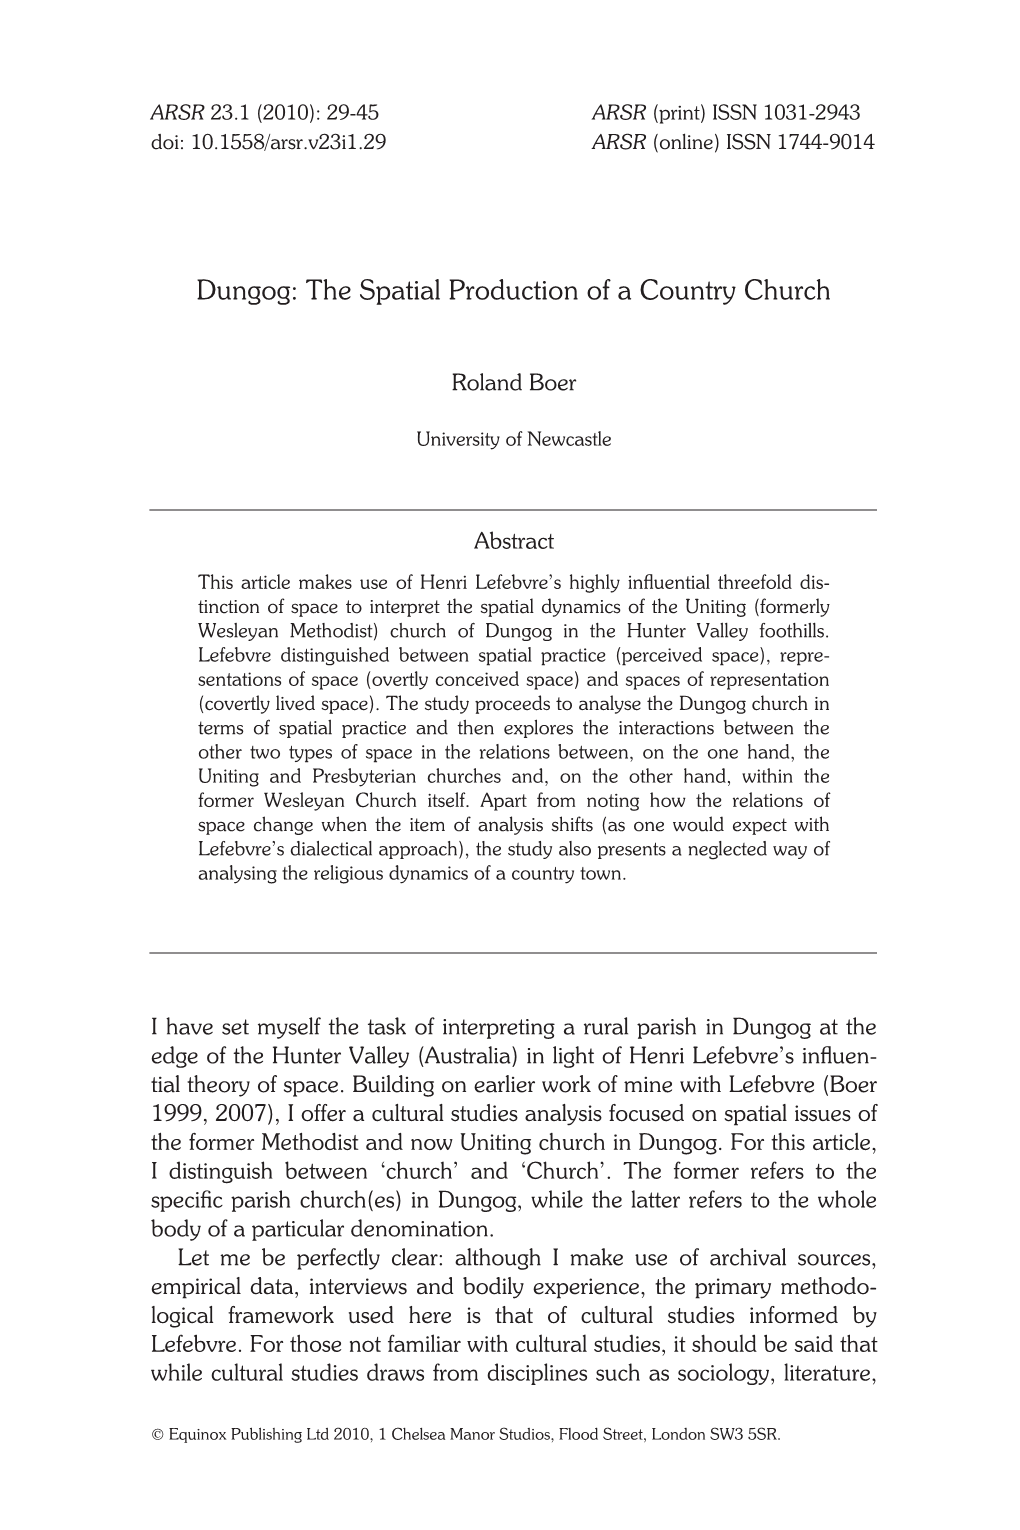 The Spatial Production of a Country Church